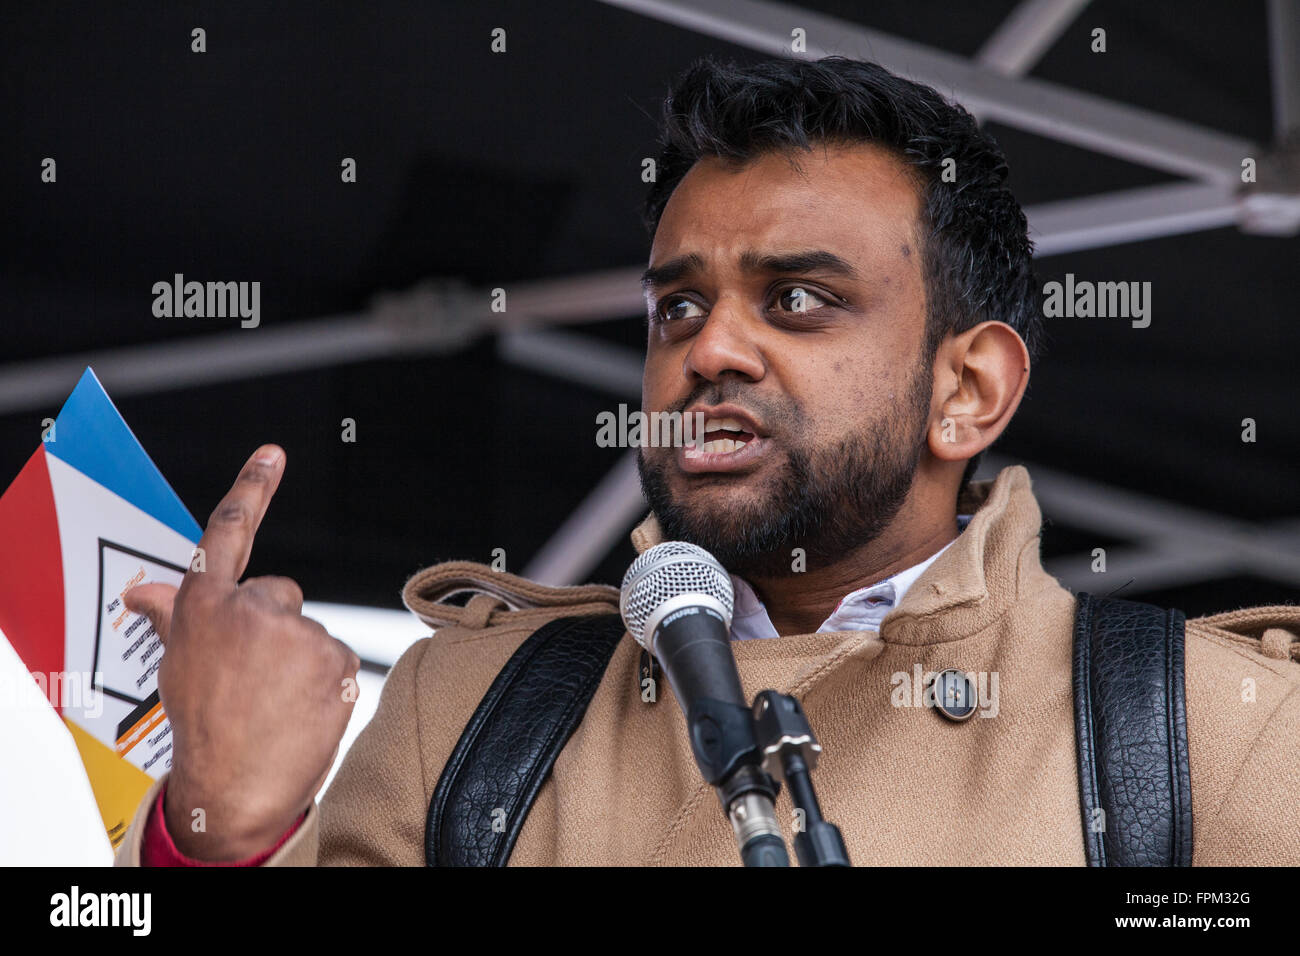 London, UK. 19th March, 2016. Shamiul Joarder of Friends of Al Aqsa addresses thousands of anti-racist campaigners at the Stand Up To Racism rally in Trafalgar Square. Credit:  Mark Kerrison/Alamy Live News Stock Photo